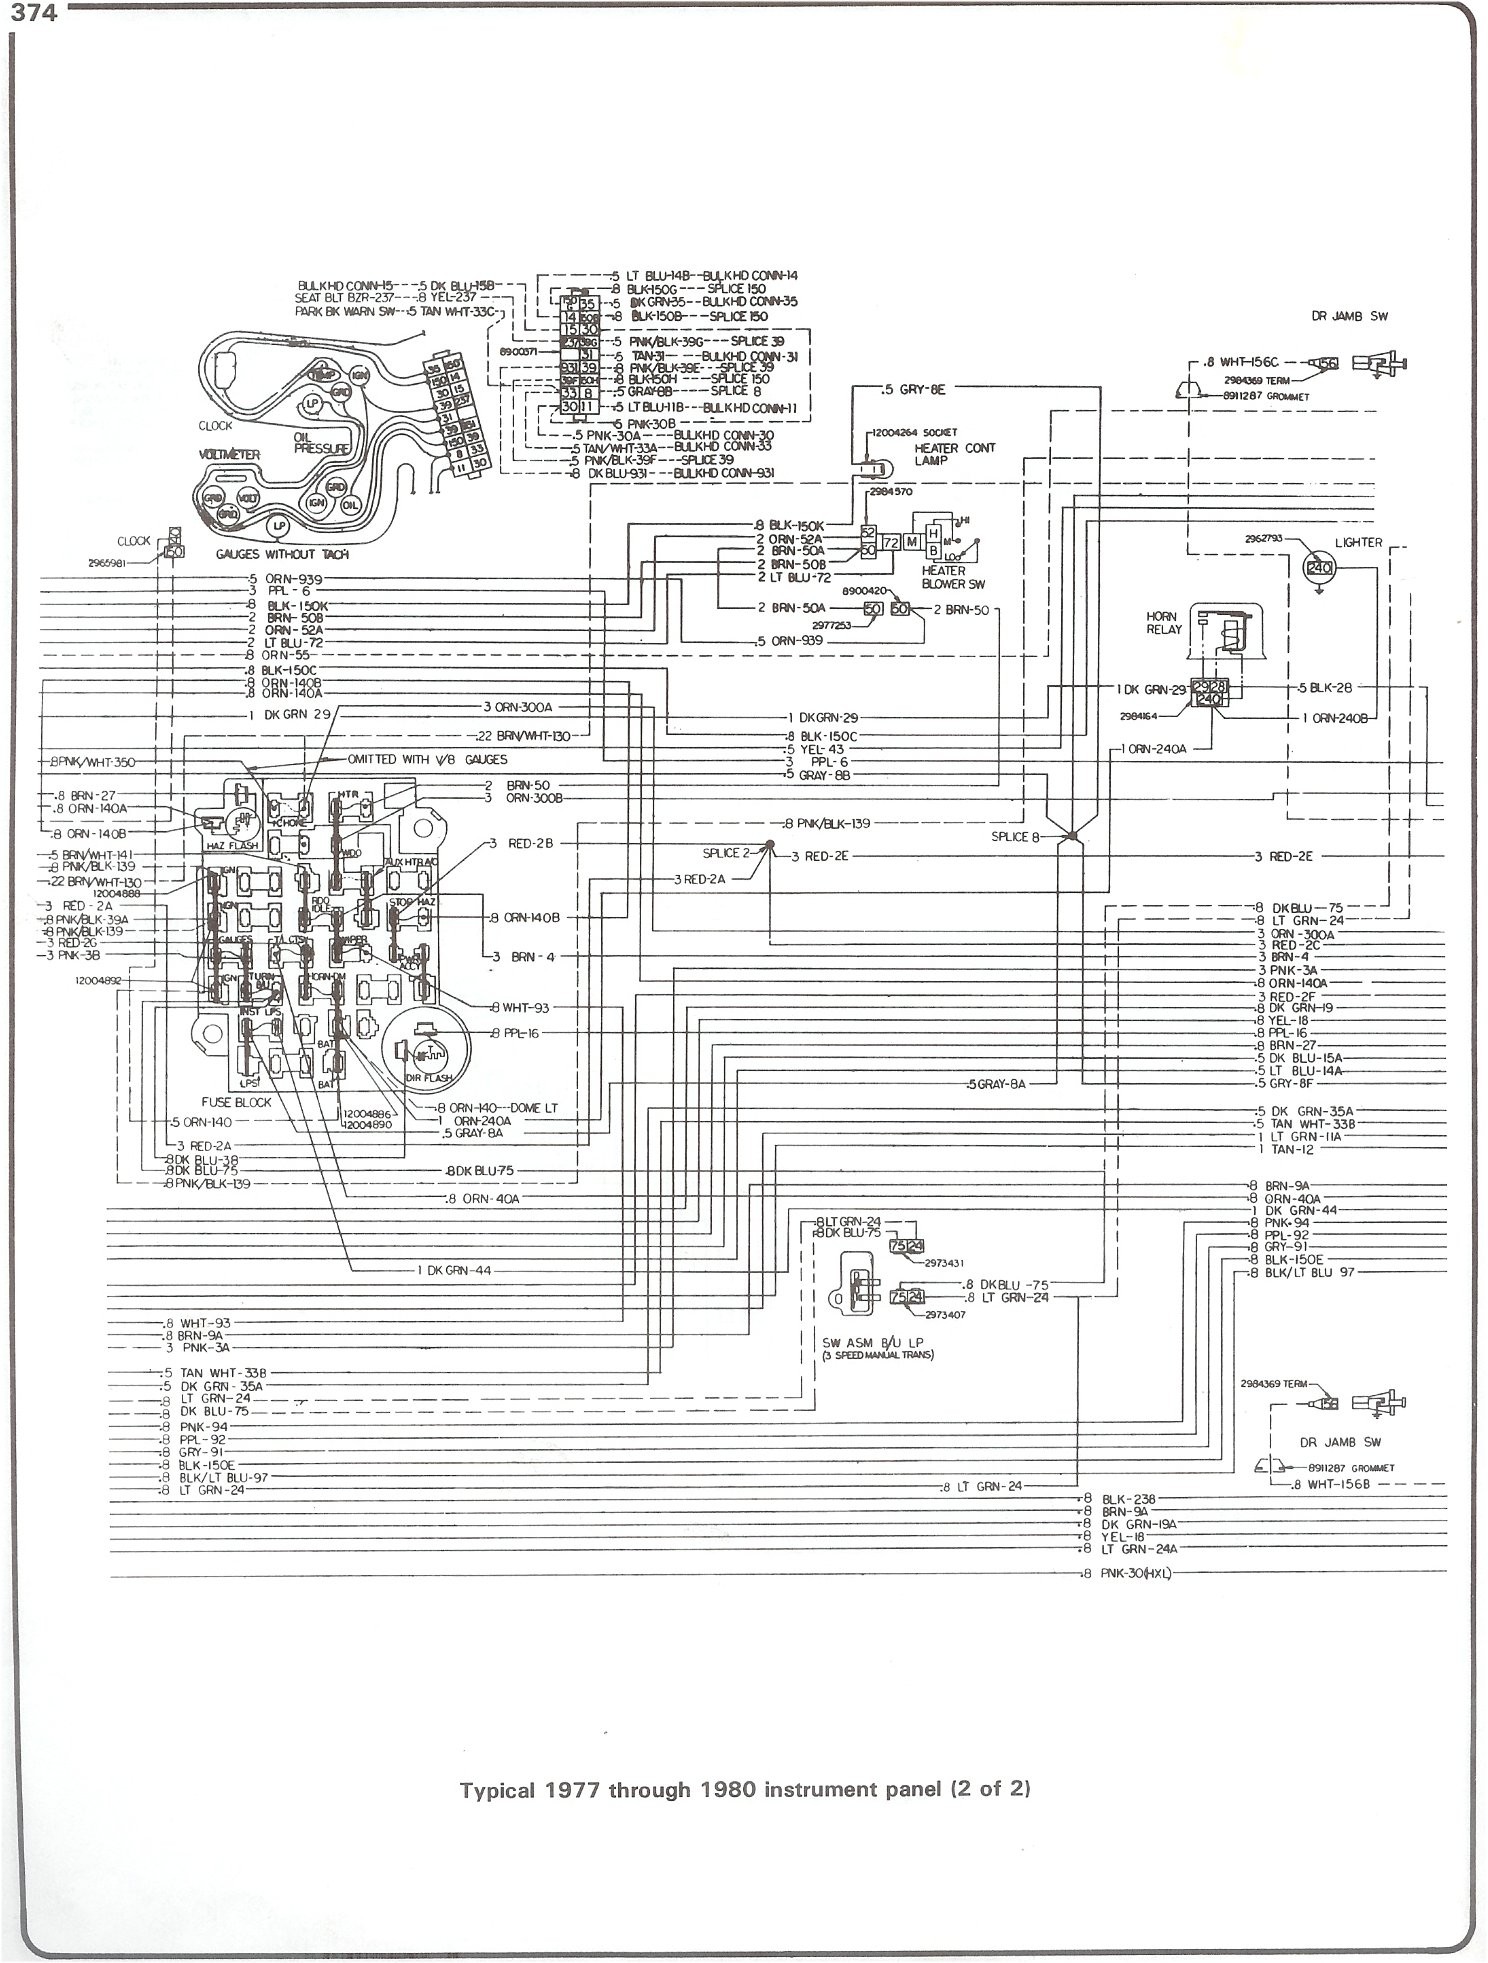 77 80 instrument pg2 with 78 chevy truck wiring diagram wiring diagram chevy starter solenoid wiring